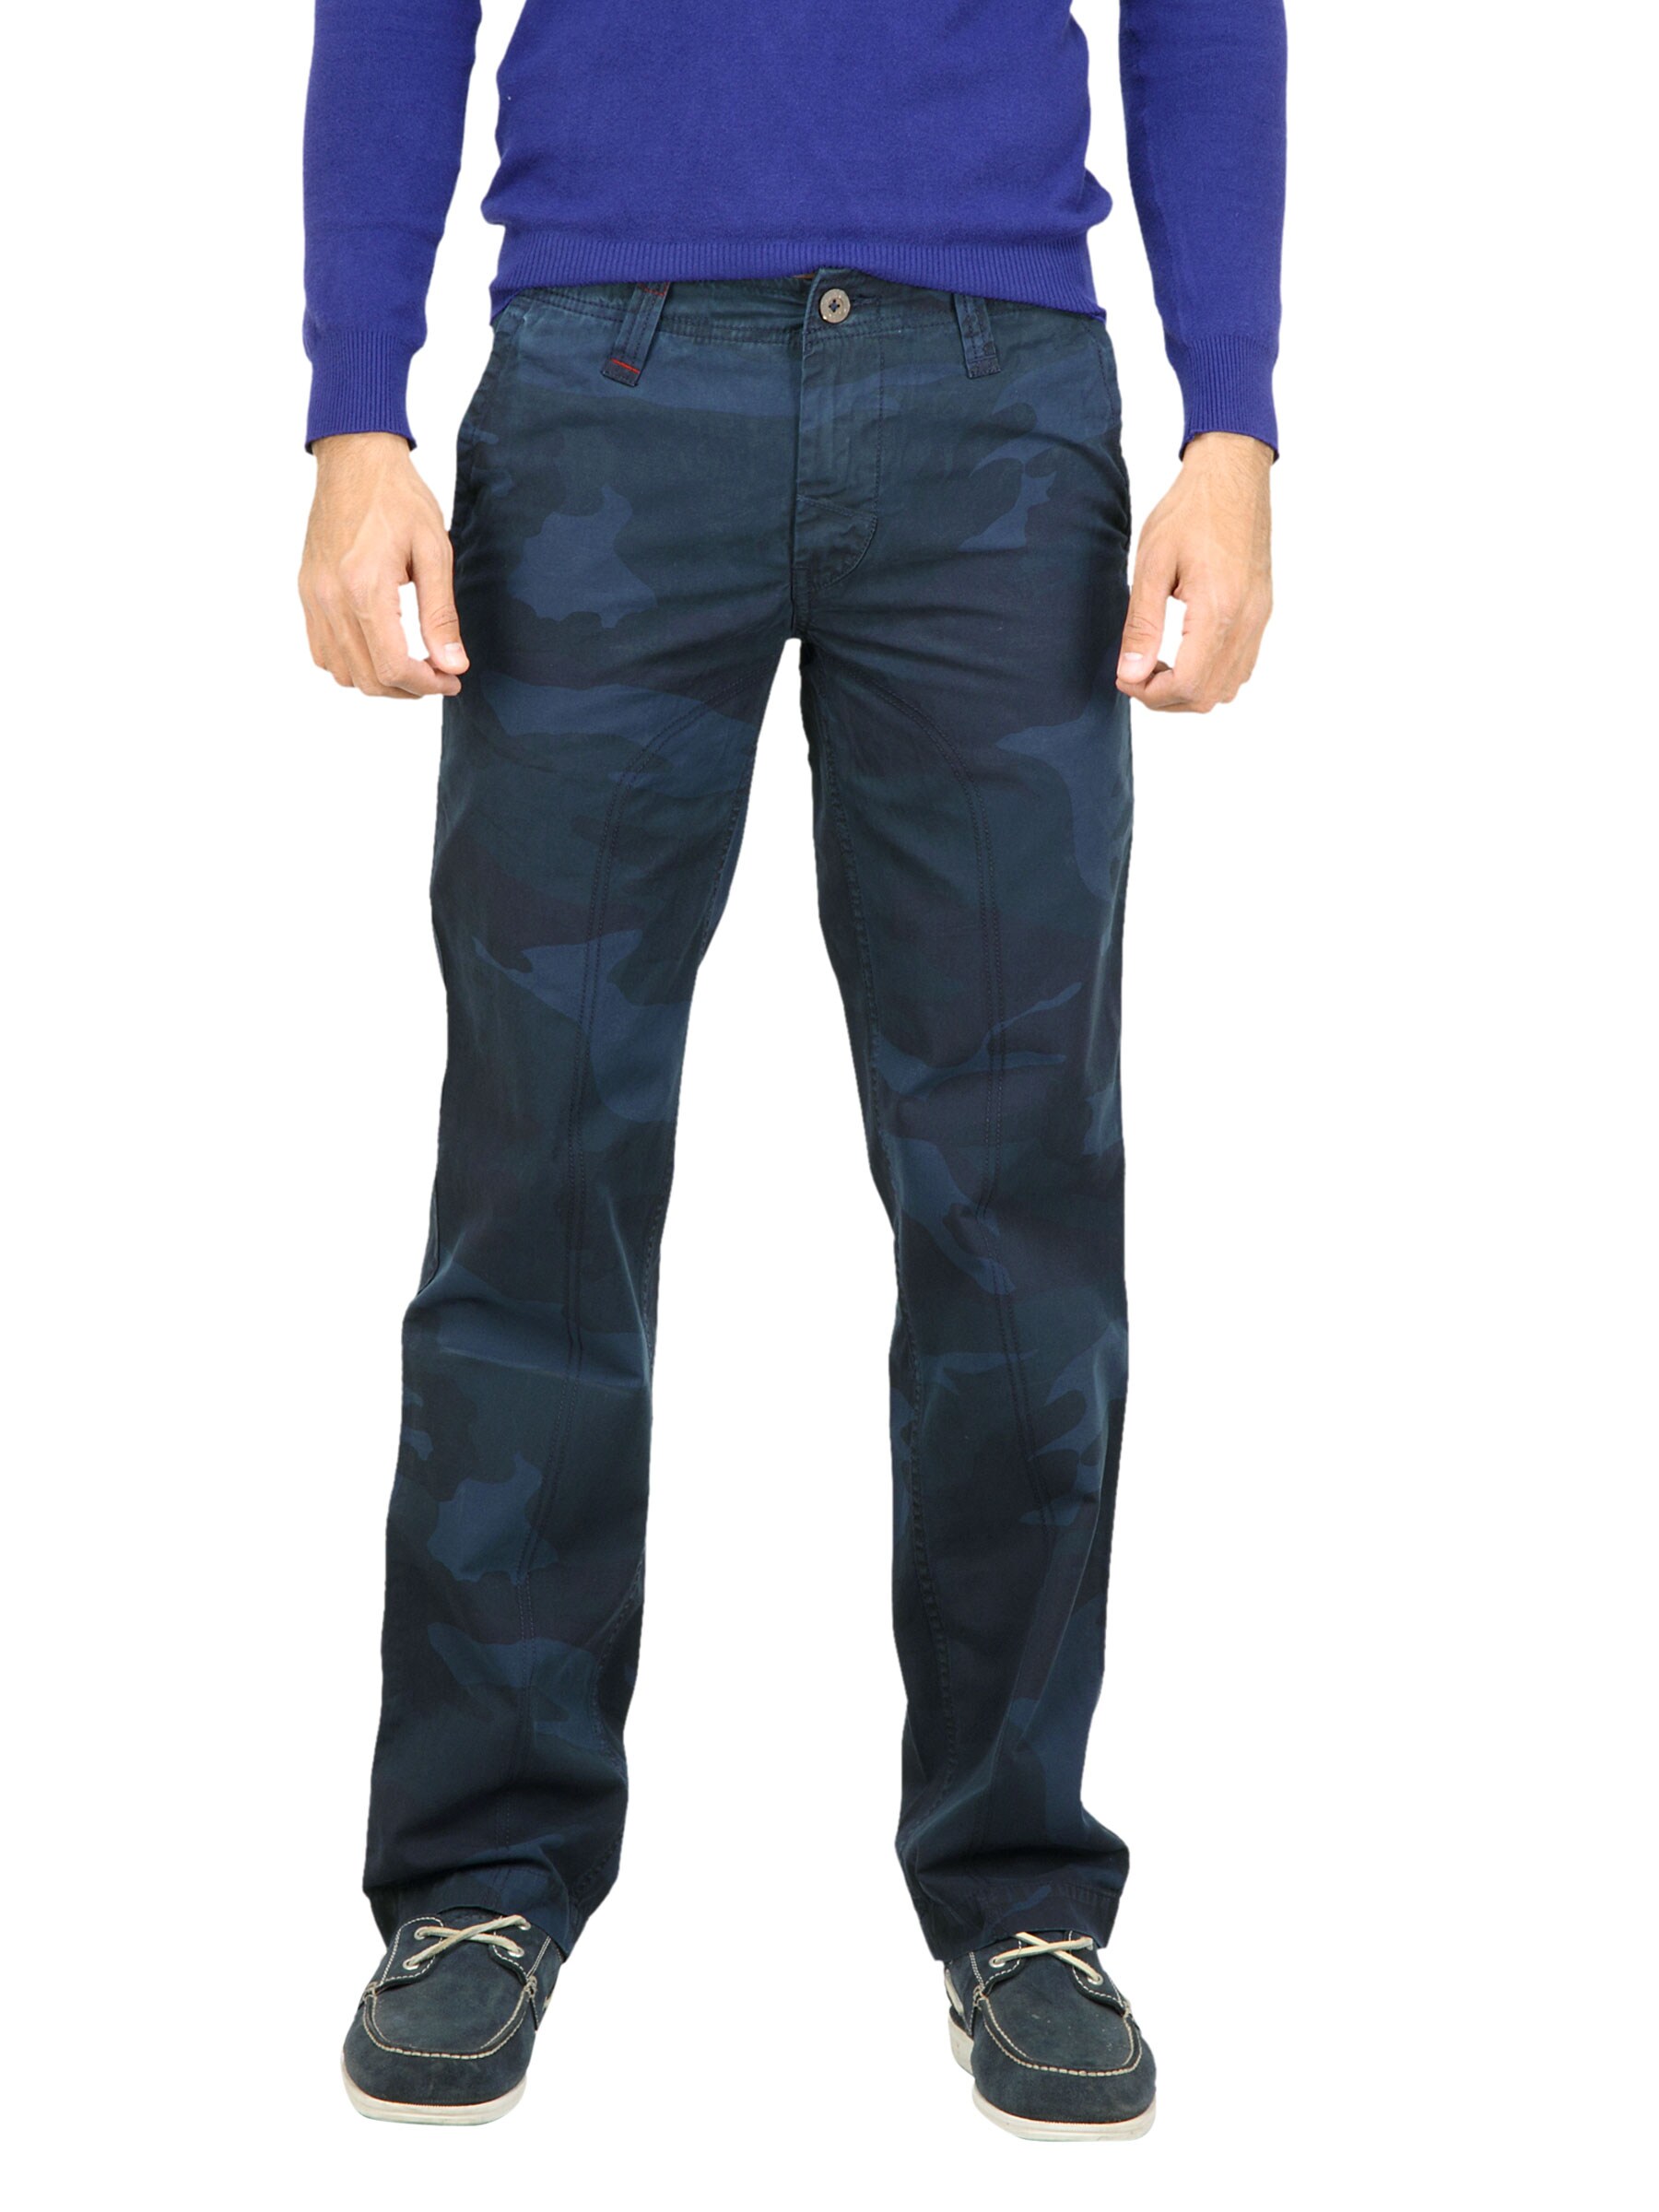 Probase Navy Blue Printed Trousers